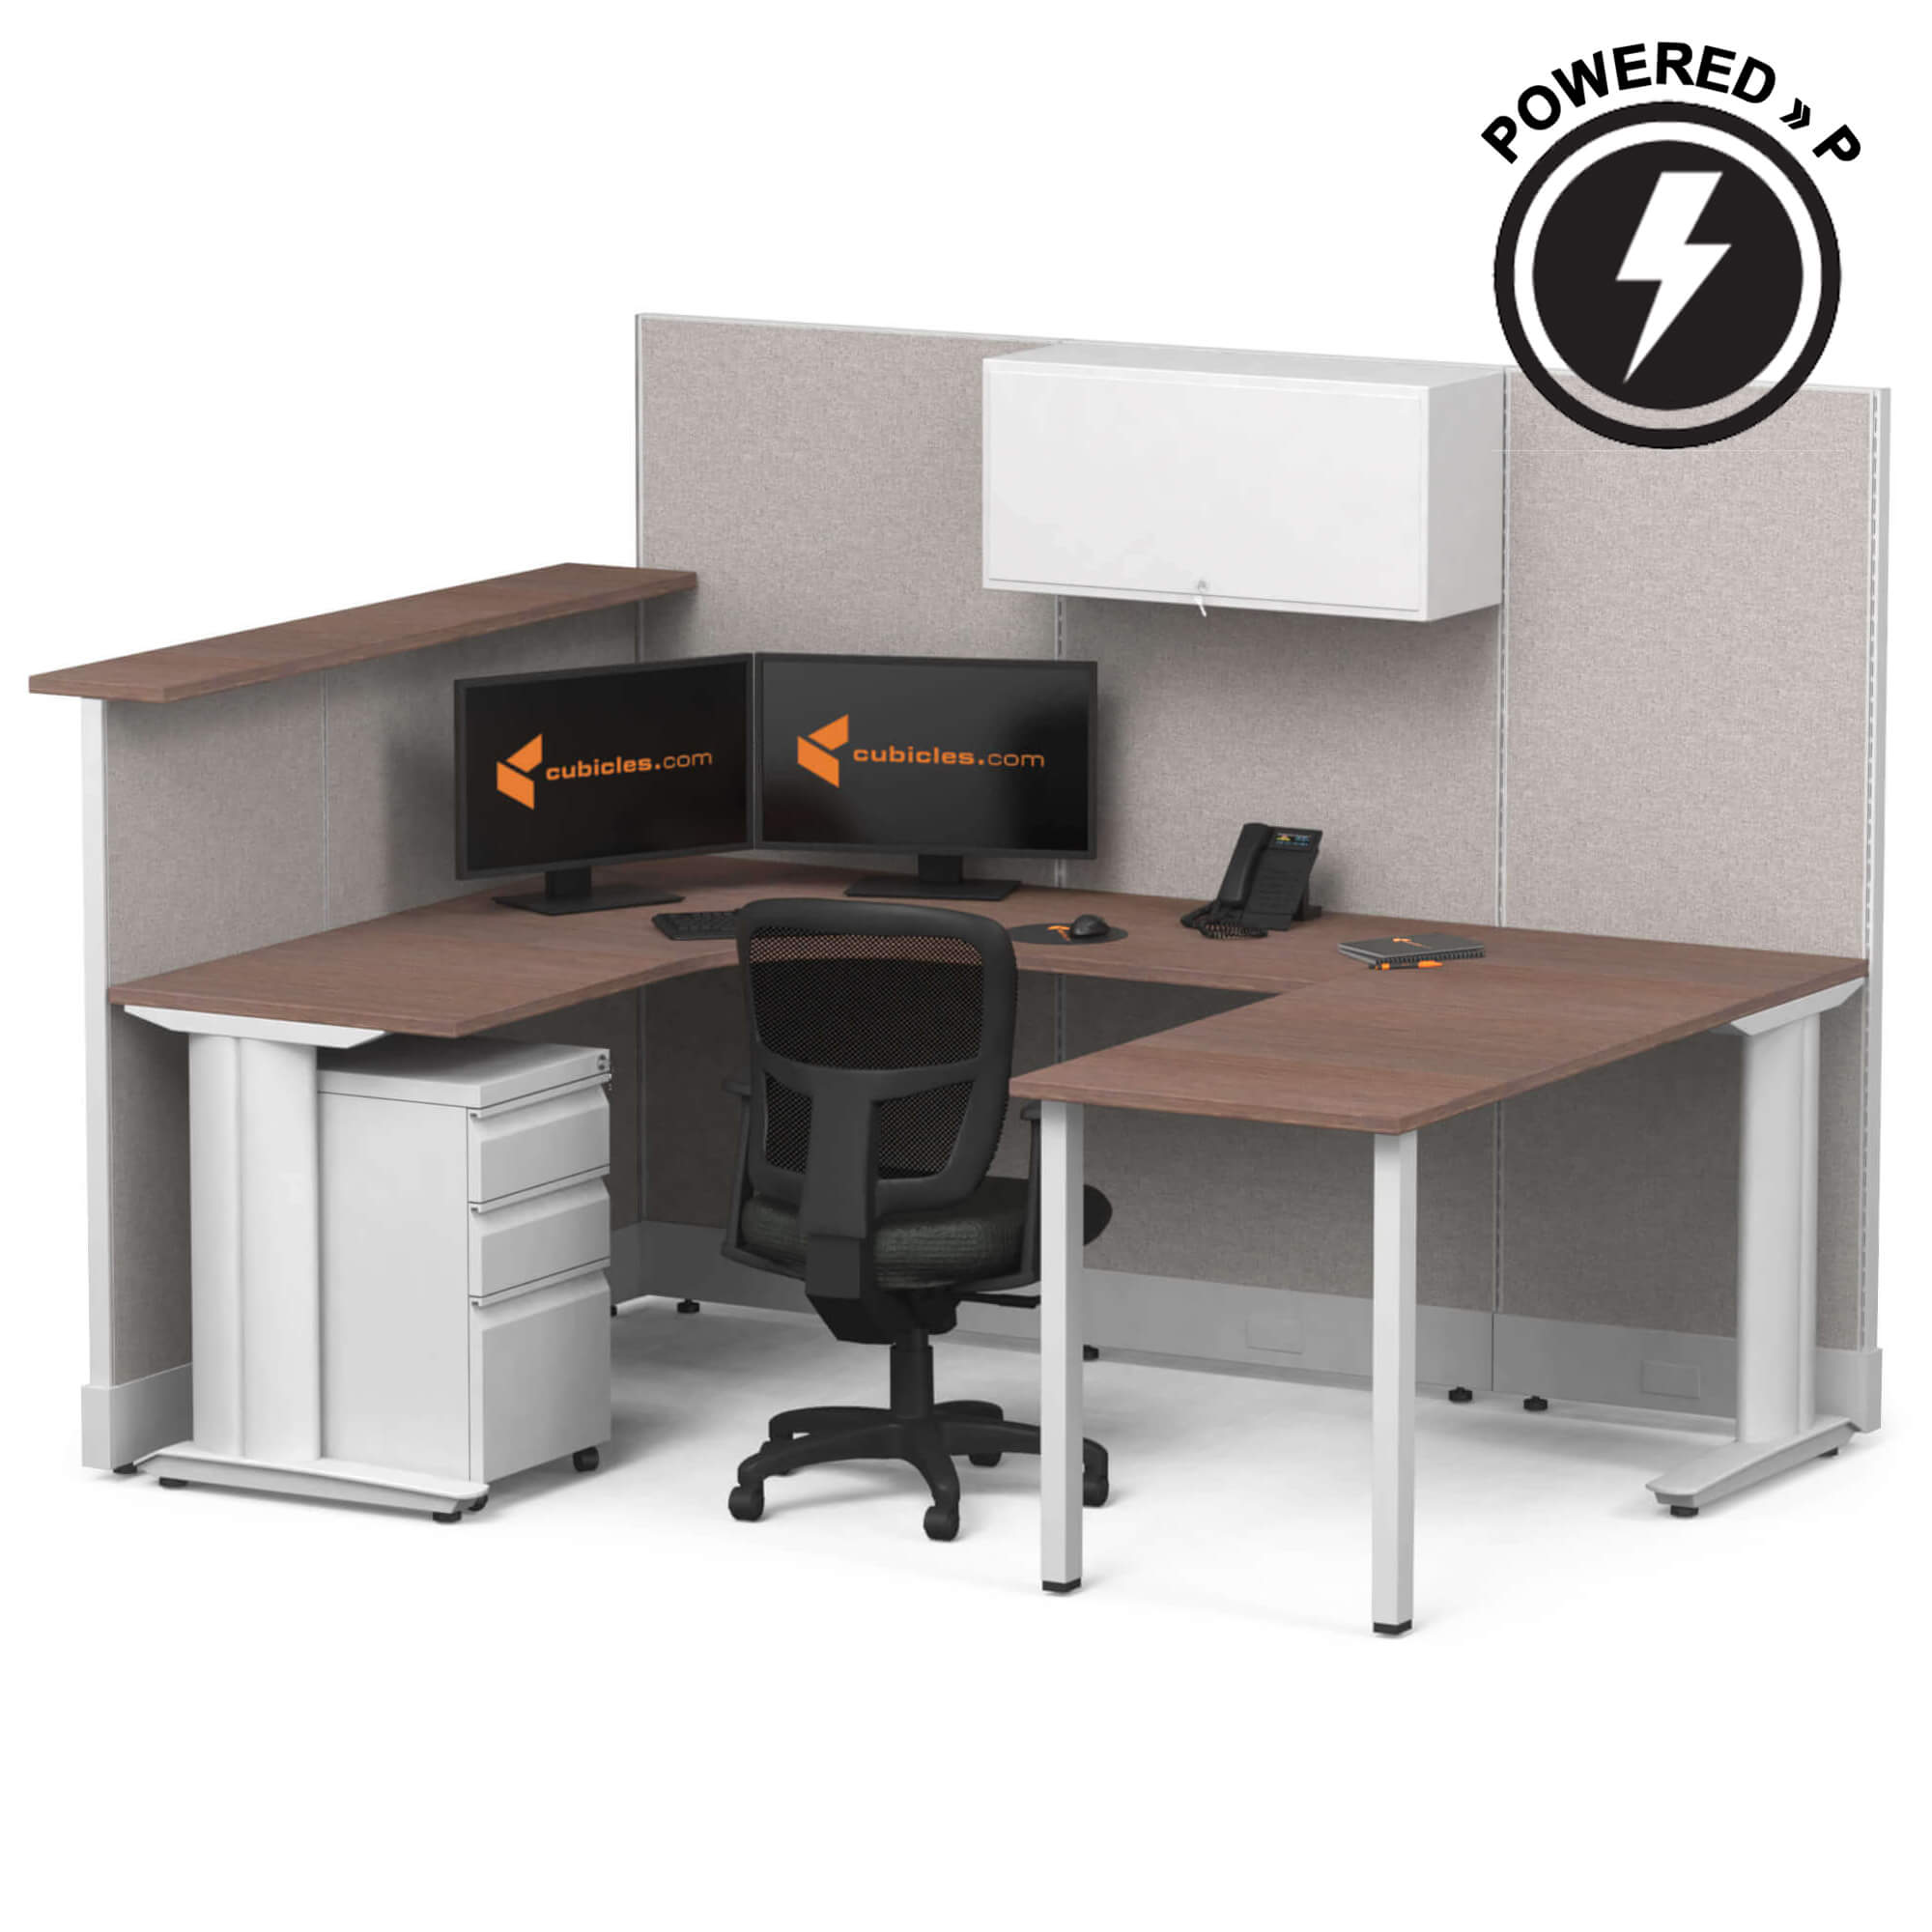 cubicle-desk-u-shaped-workstation-powered-with-transaction-top-and-storage-sign.jpg